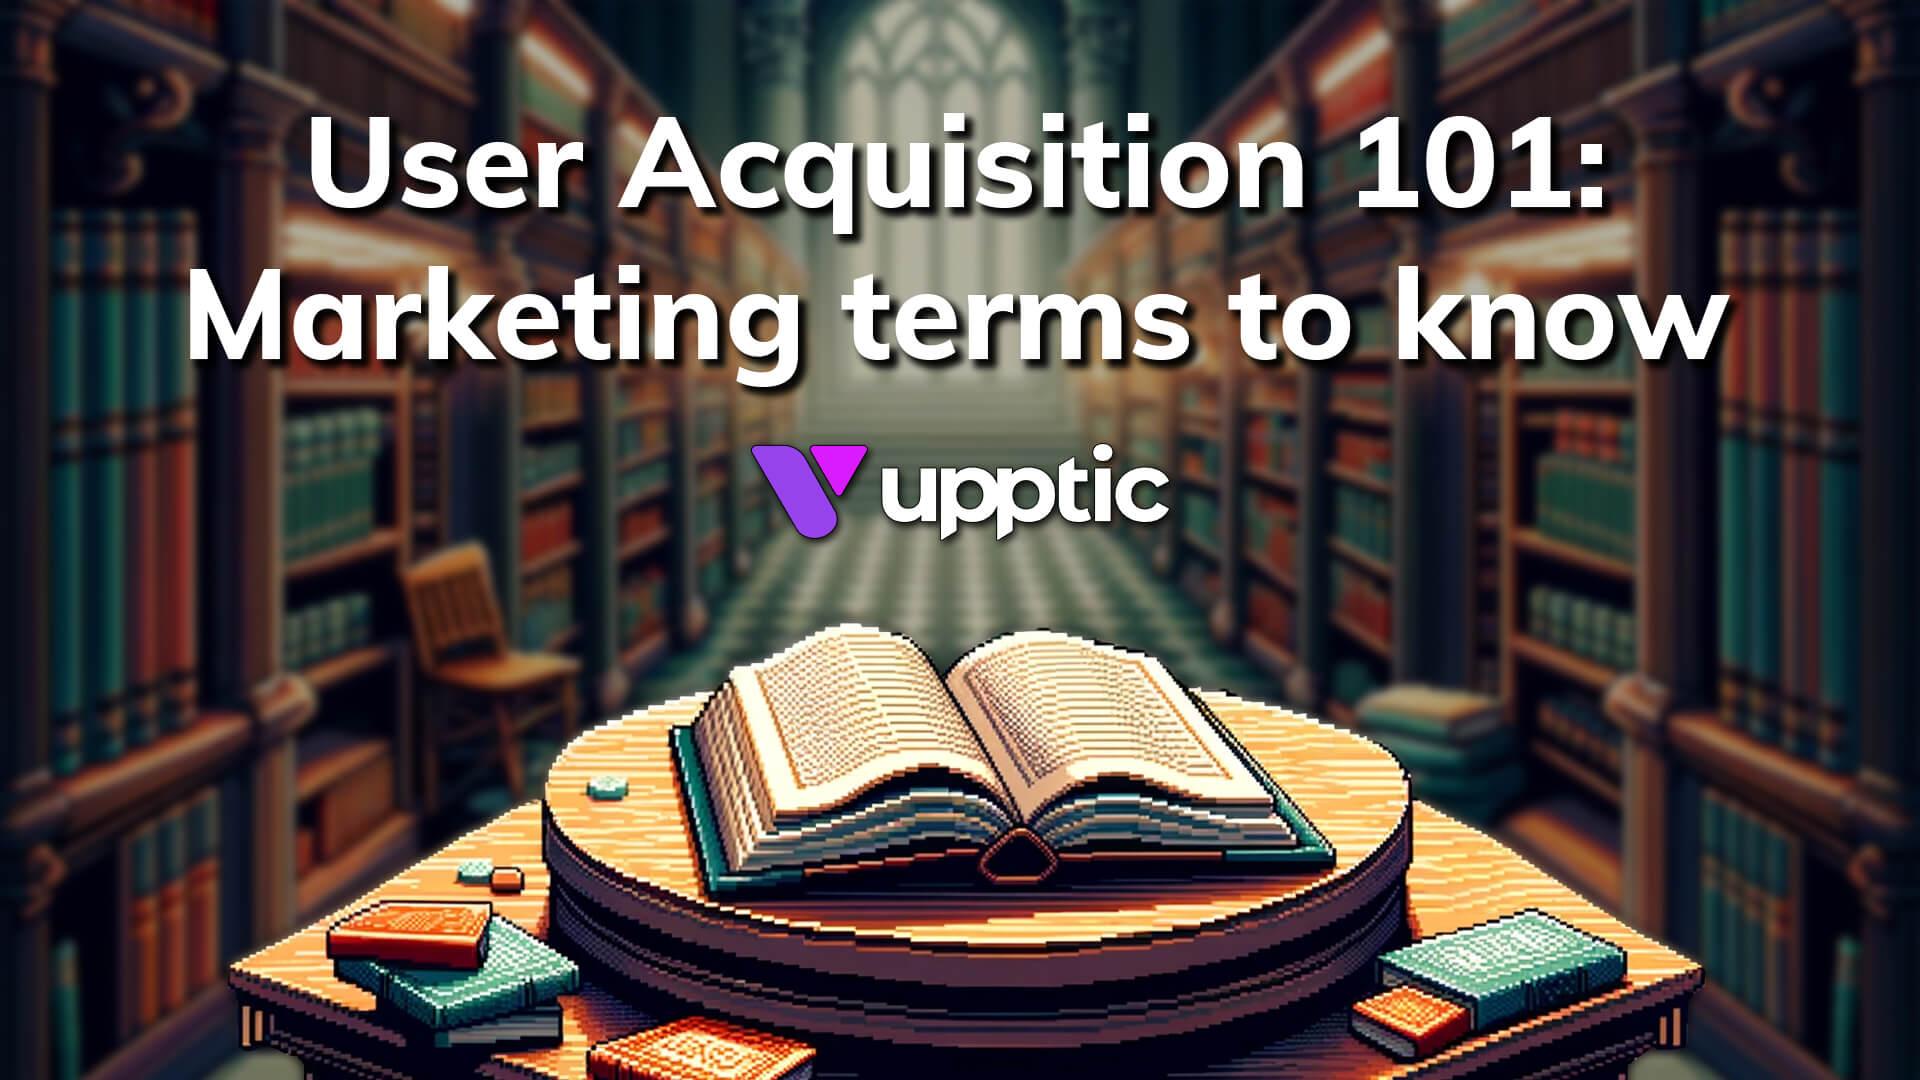 User Acquisition 101: Marketing terms to know